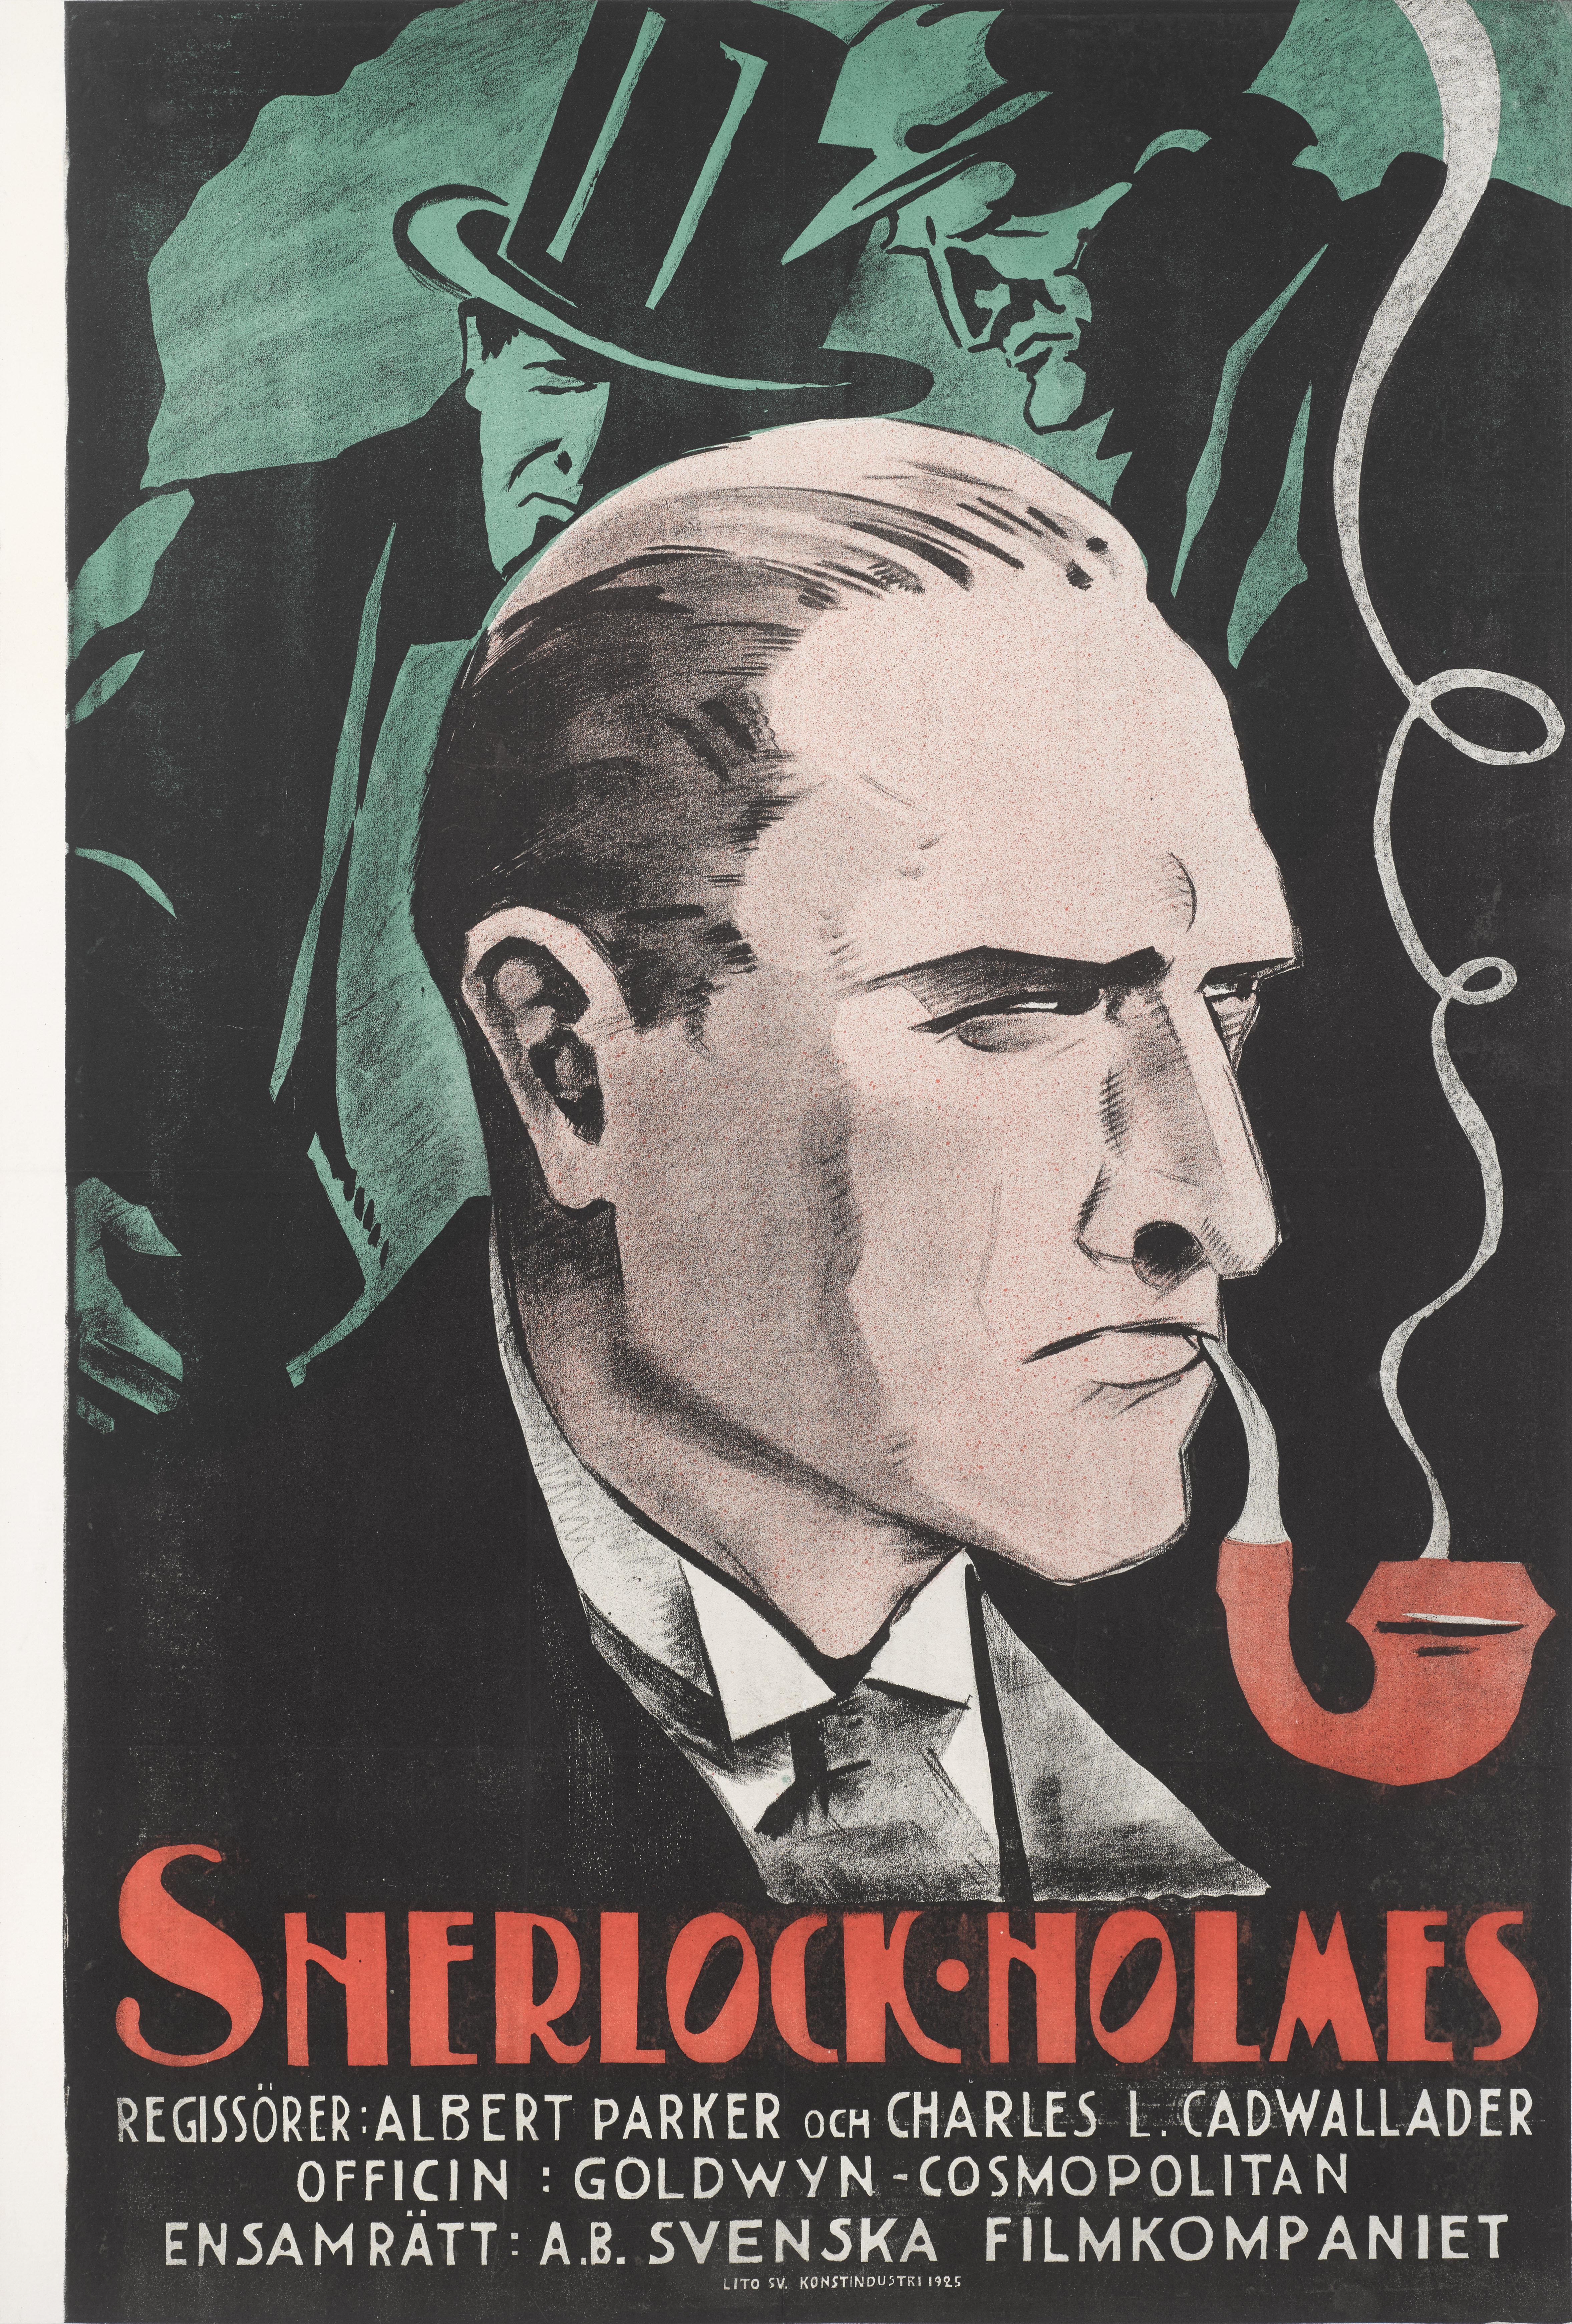 Original 1922 Swedish film poster for Lobby the Silent film Sherlock Holmes film starring John Barrymore and Roland Young. 
The film was directed by Albert Parker. To date only a couple of these posters have ever surfaced.
This poster is from 1922